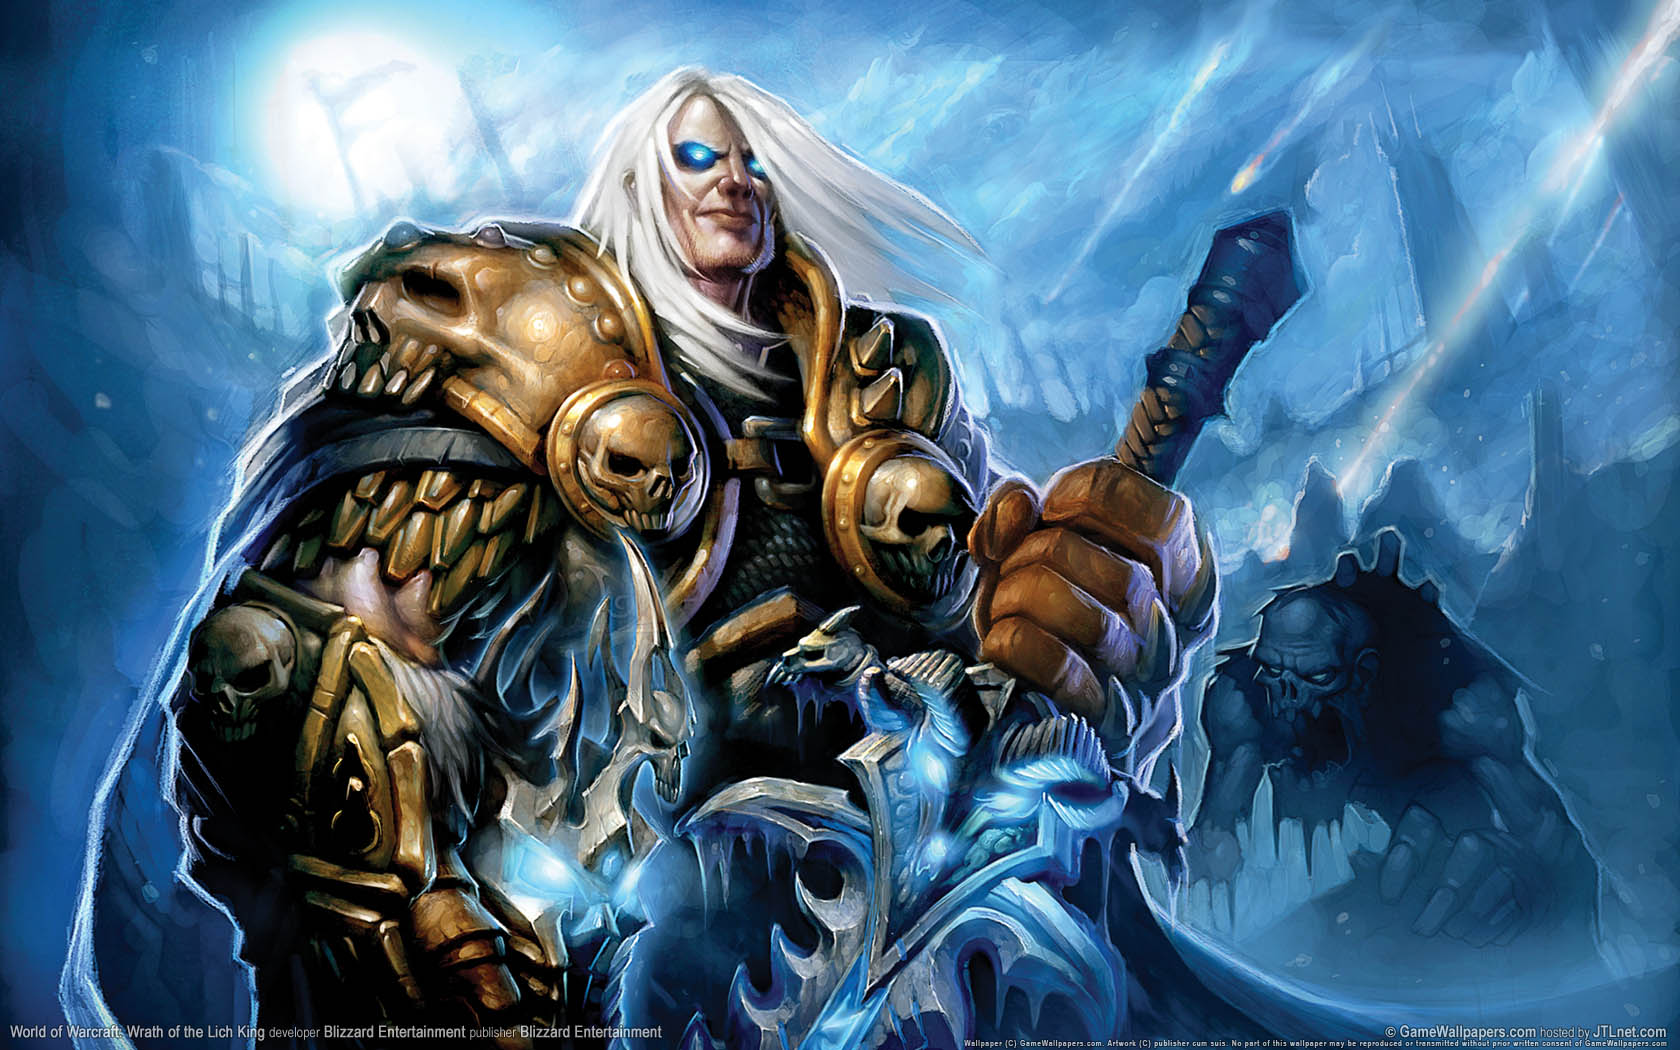 World of Warcraft: Wrath of the Lich King fond d'cran 01 1680x1050